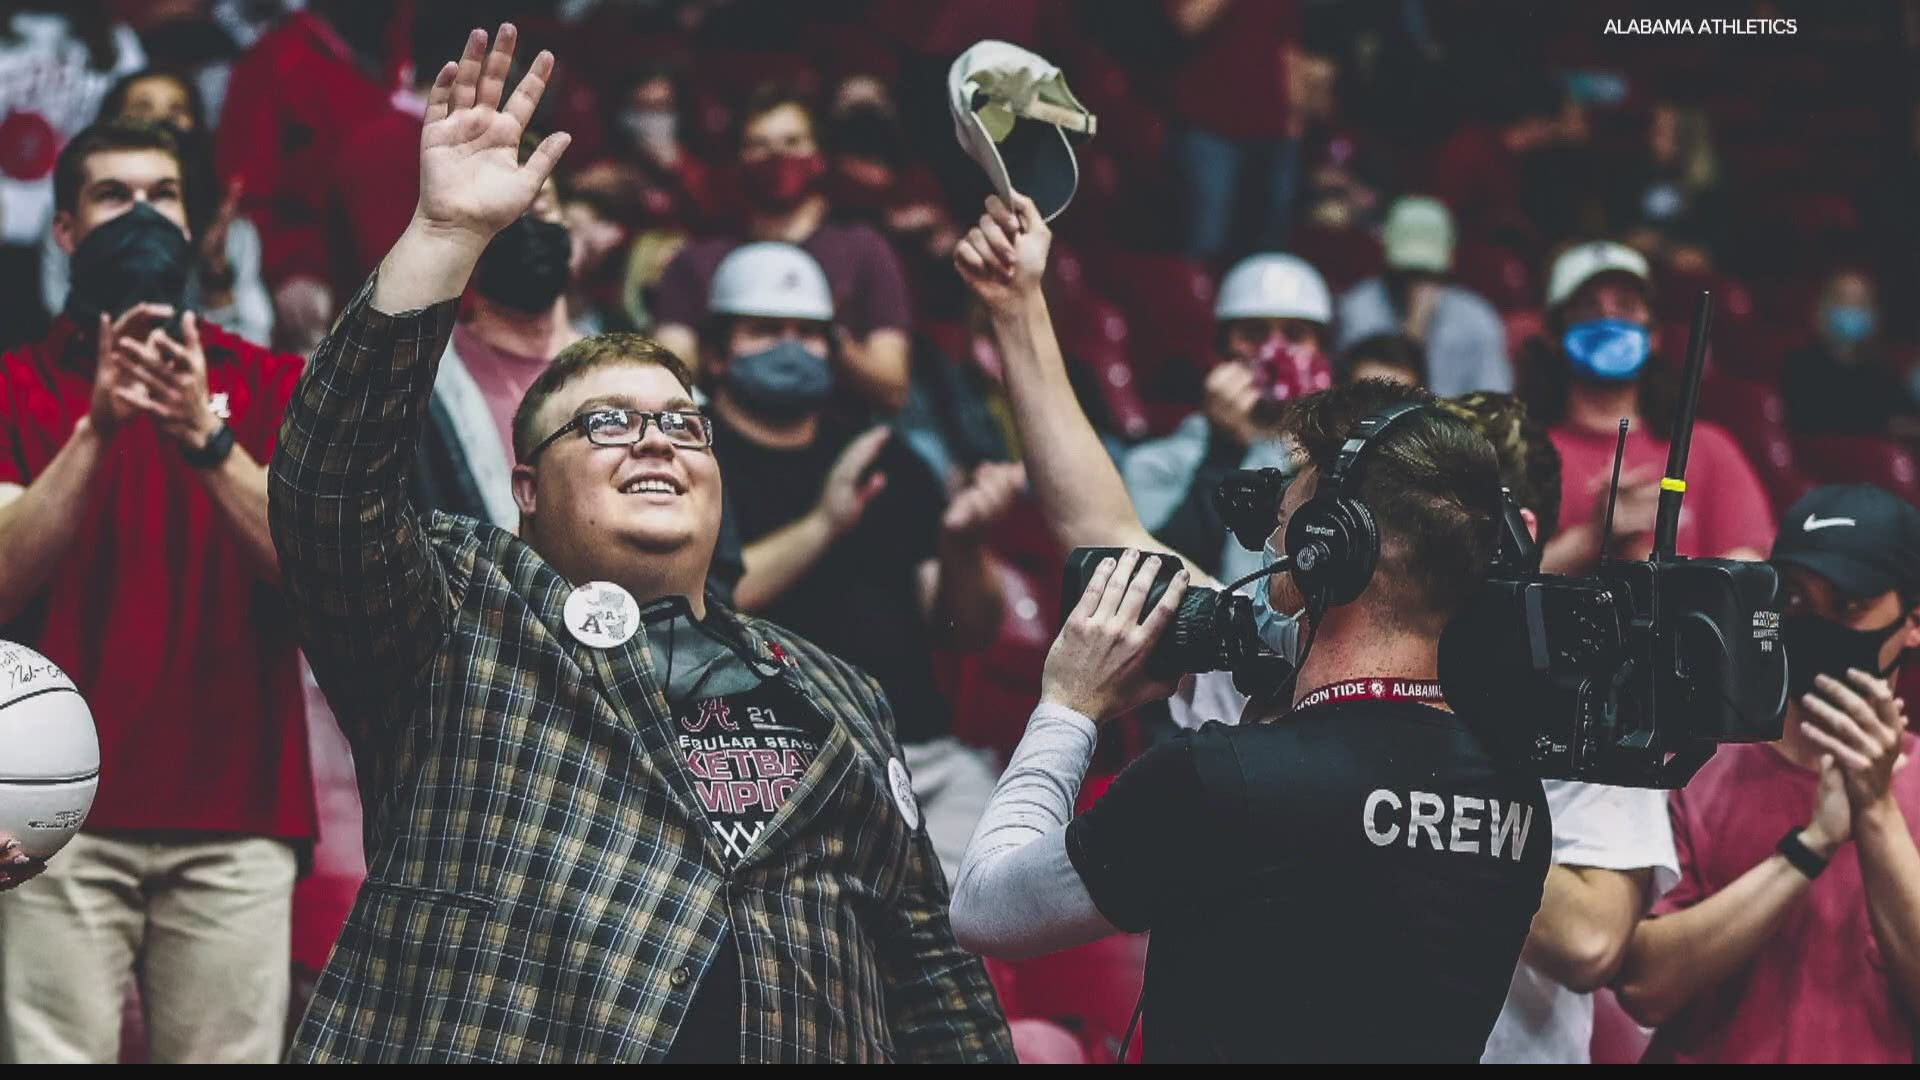 The Associated Press reports Luke Ratliff was hospitalized after returning to Tuscaloosa on March 29 — one day after attending Alabama's Sweet 16 game vs. UCLA.